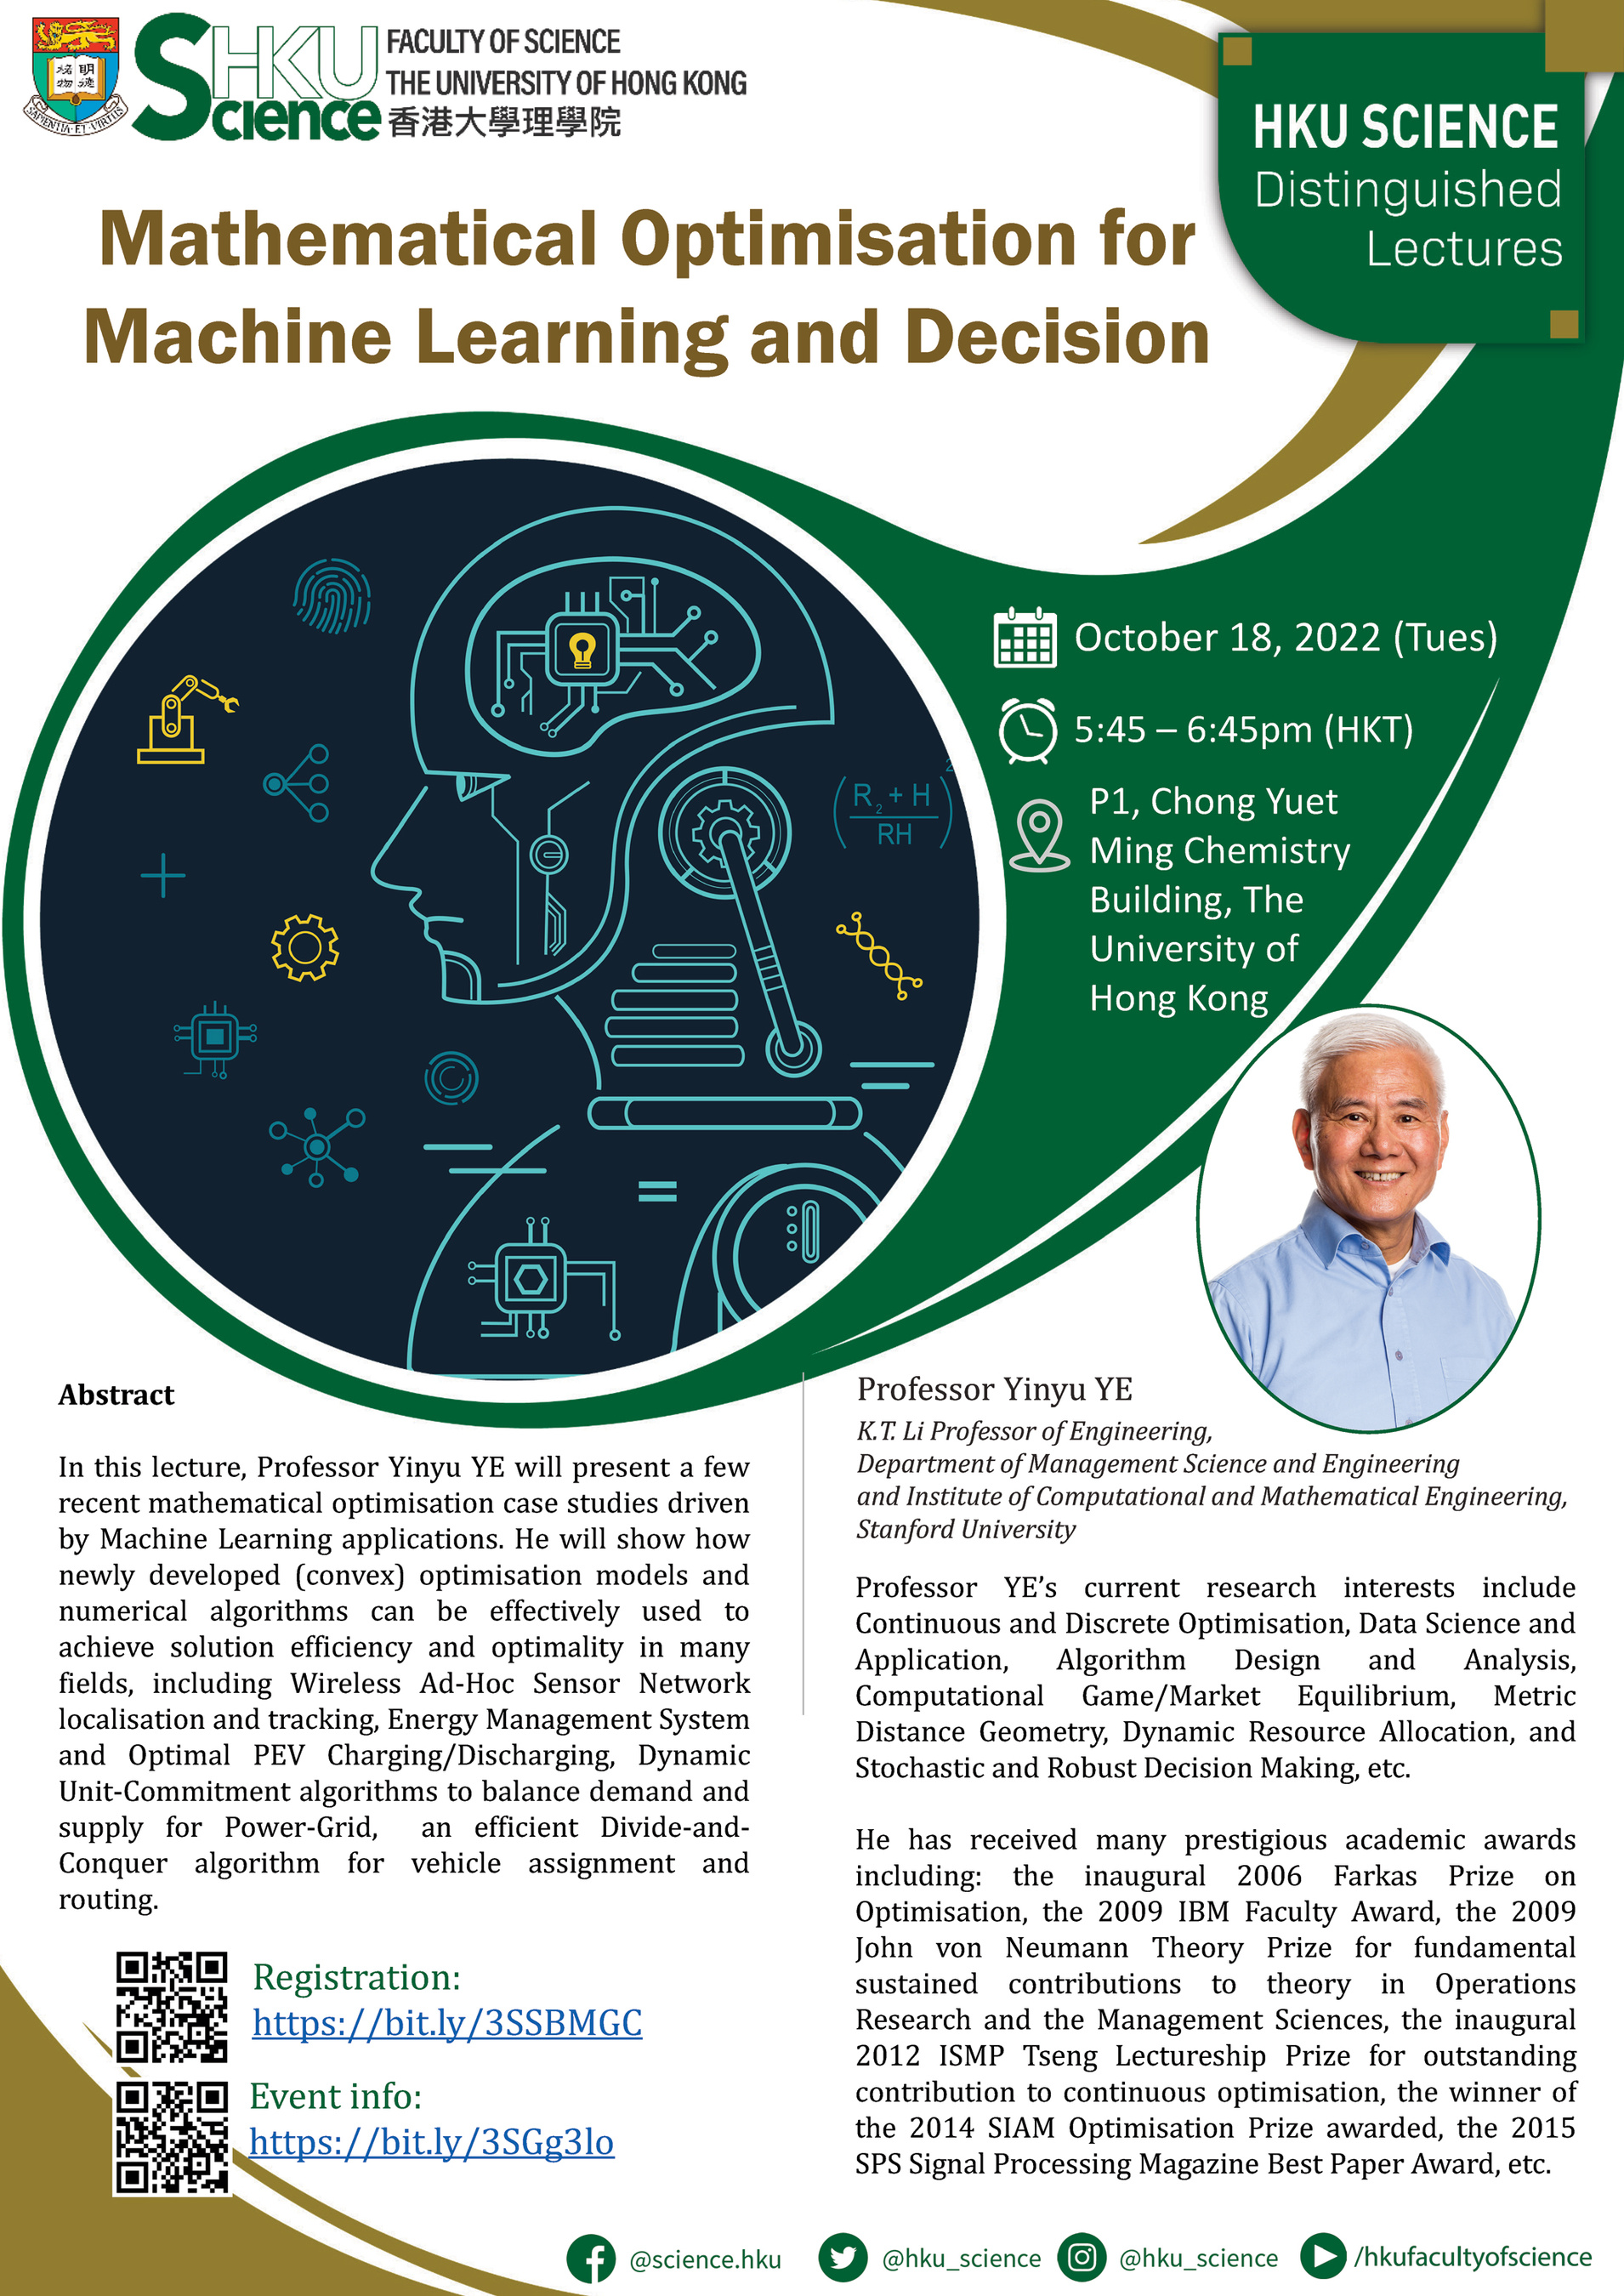 Distinguished Lecture (Oct 18)